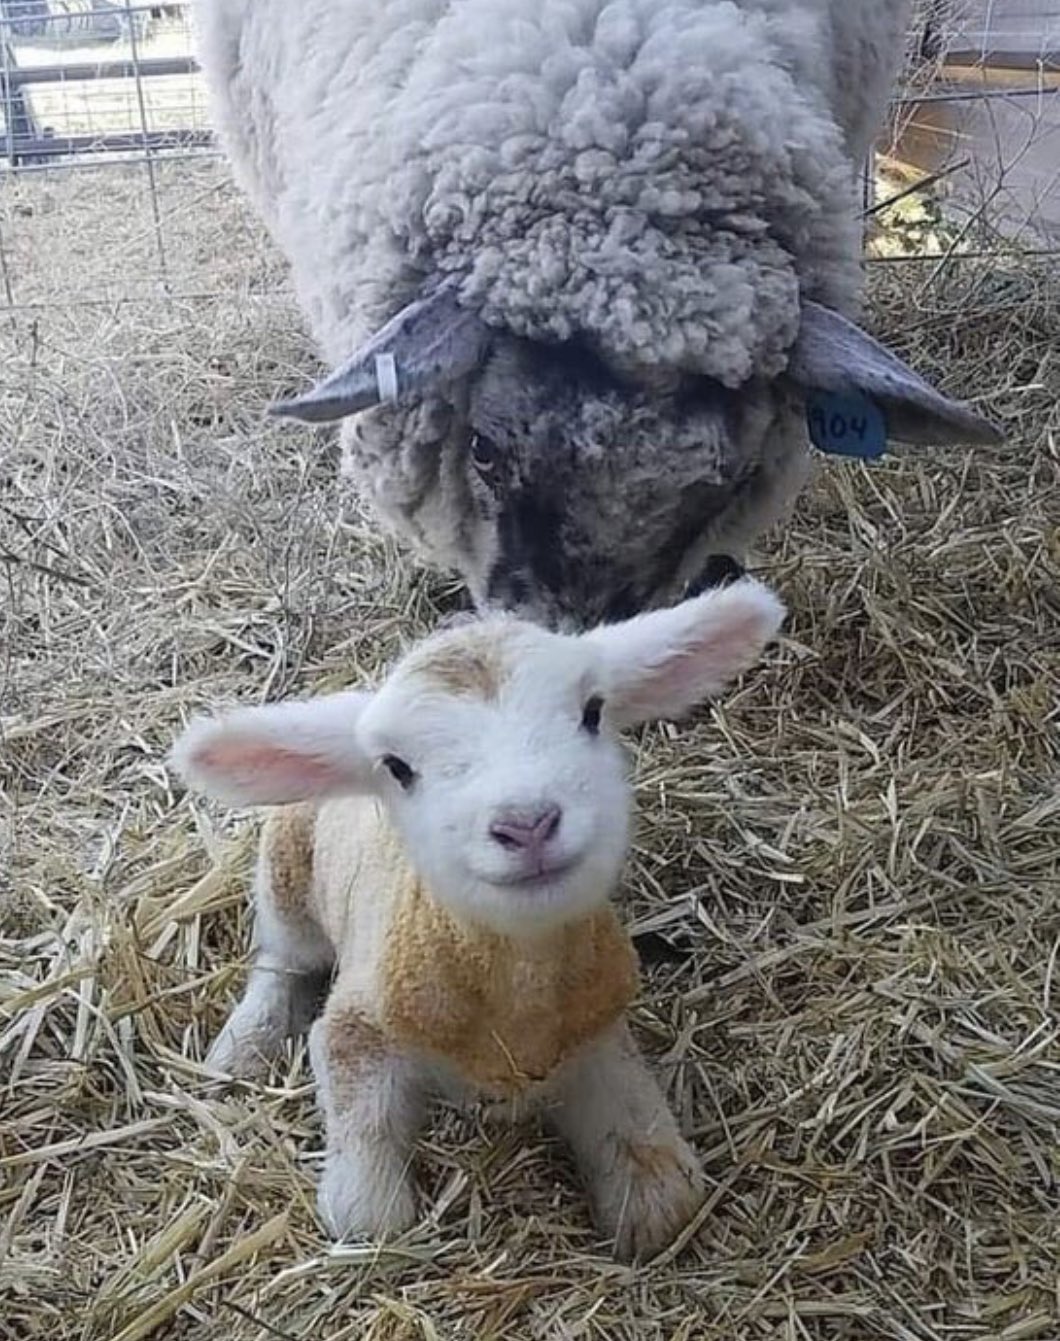 Colin McFarlane🙏🏽🇺🇦 on Twitter: "Awh. Gotta share this pic of a 15  minutes old baby lamb (not a goat as wrongly put in first post!!) It helped  to put a smile on